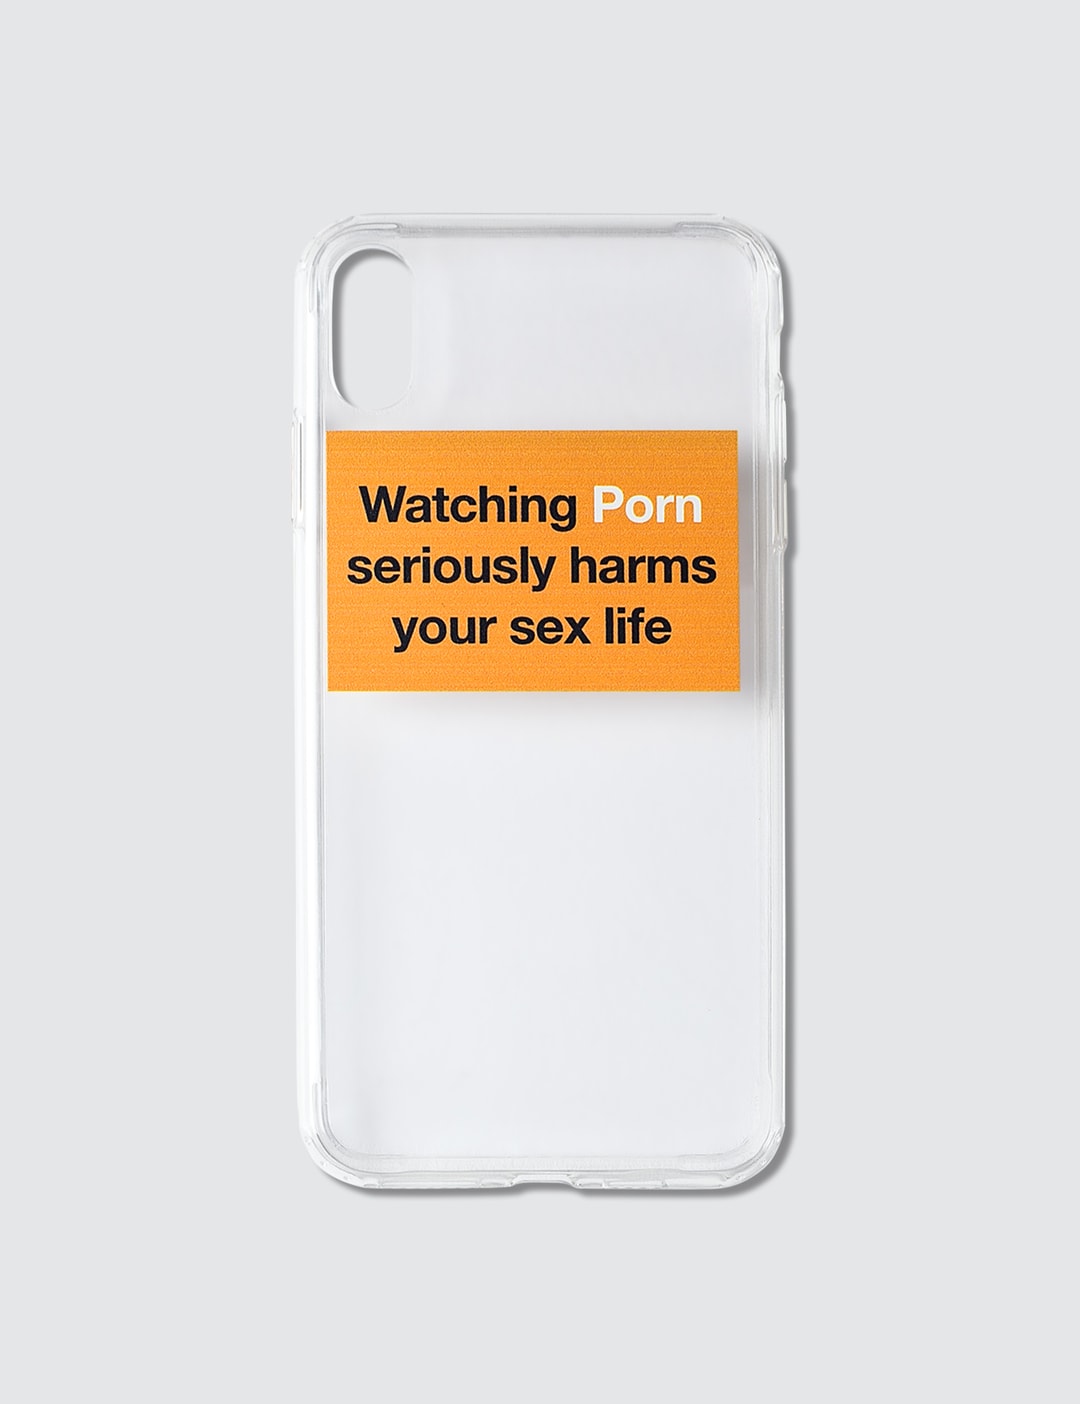 Watch Porn Image Urban Sophistication - Fuck Porn Iphone Cover | HBX - Globally ...